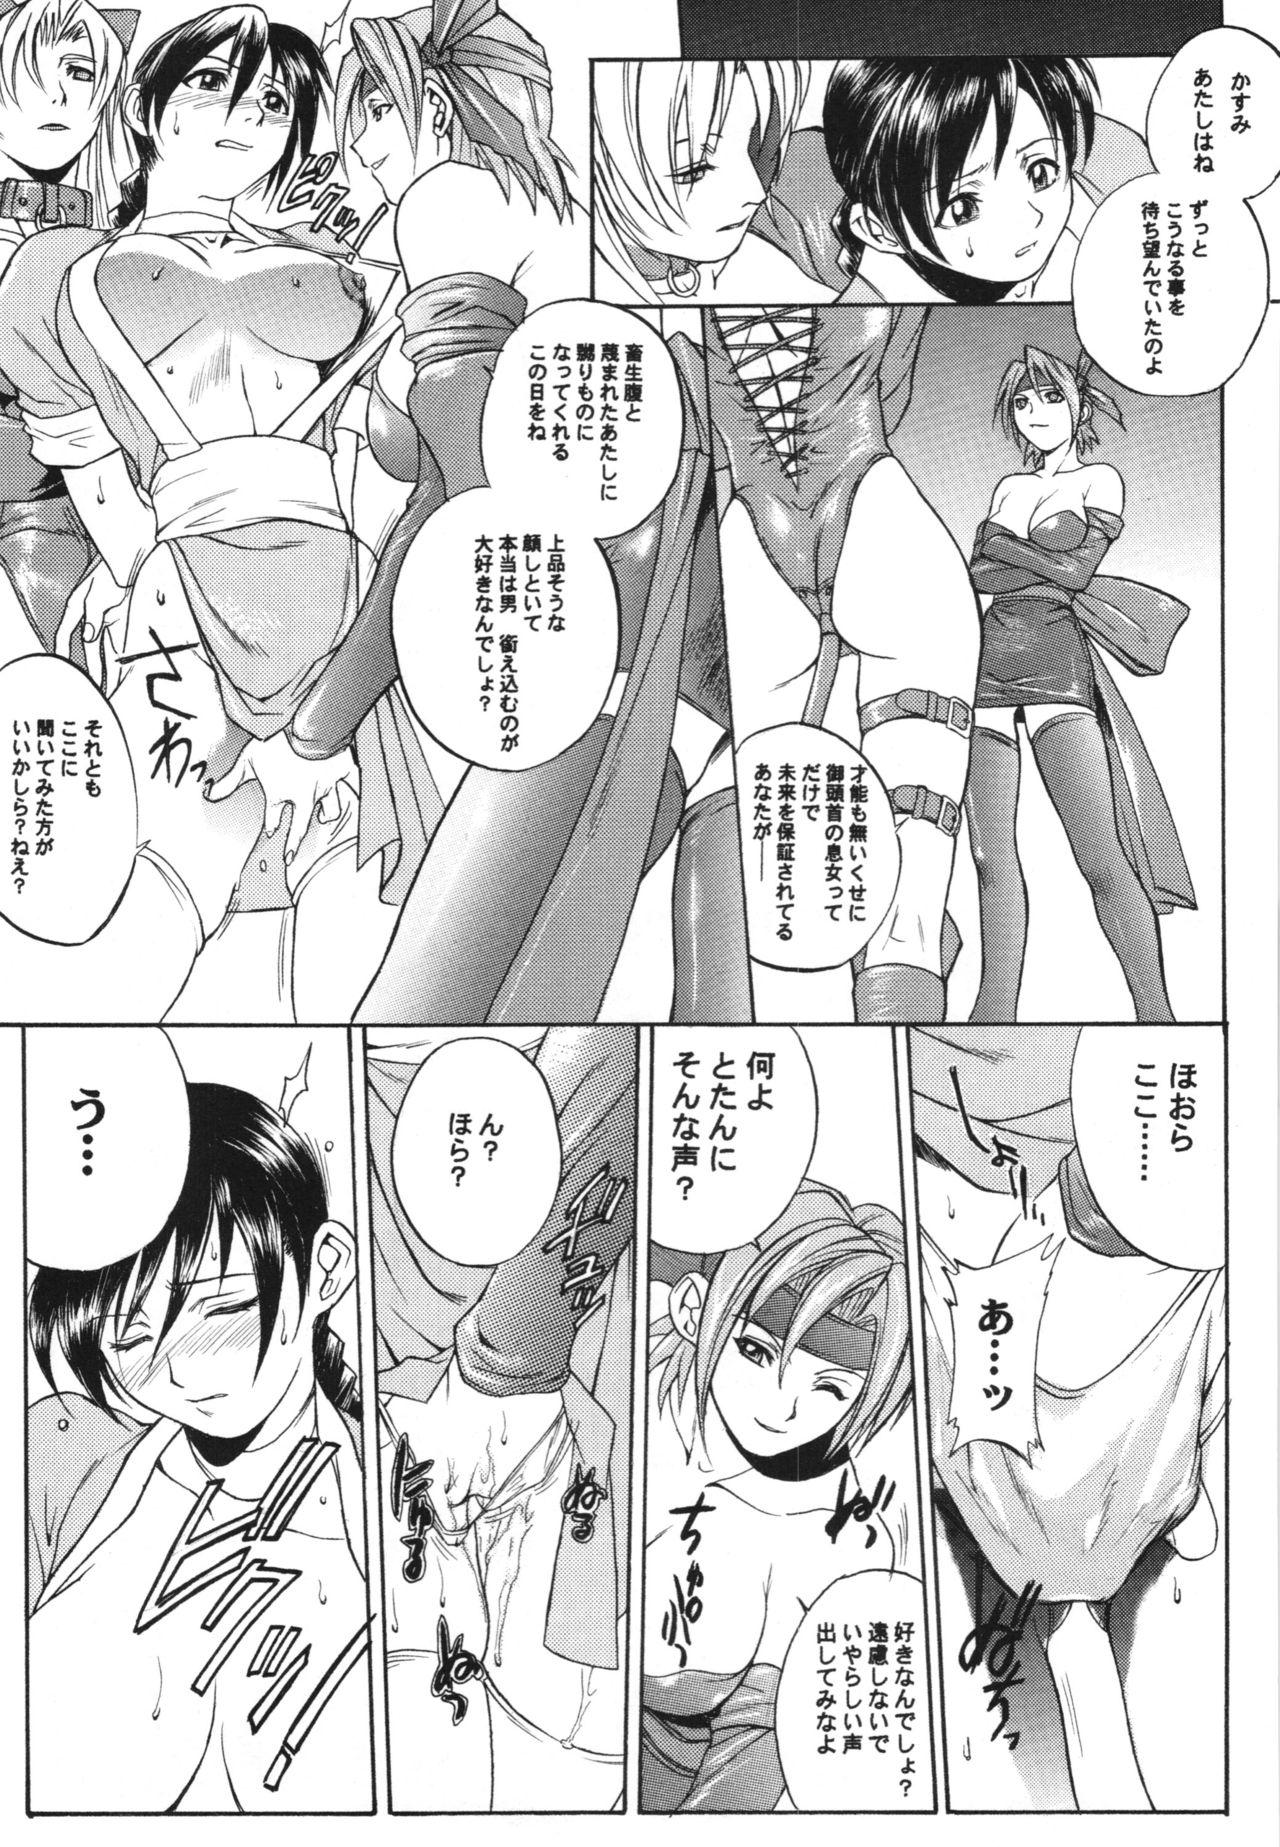 Sexy Whores WAY OF TEX-MEX Soushuuhen 3 + Omakebon - Dead or alive To heart Xenosaga Free Amatuer - Page 11